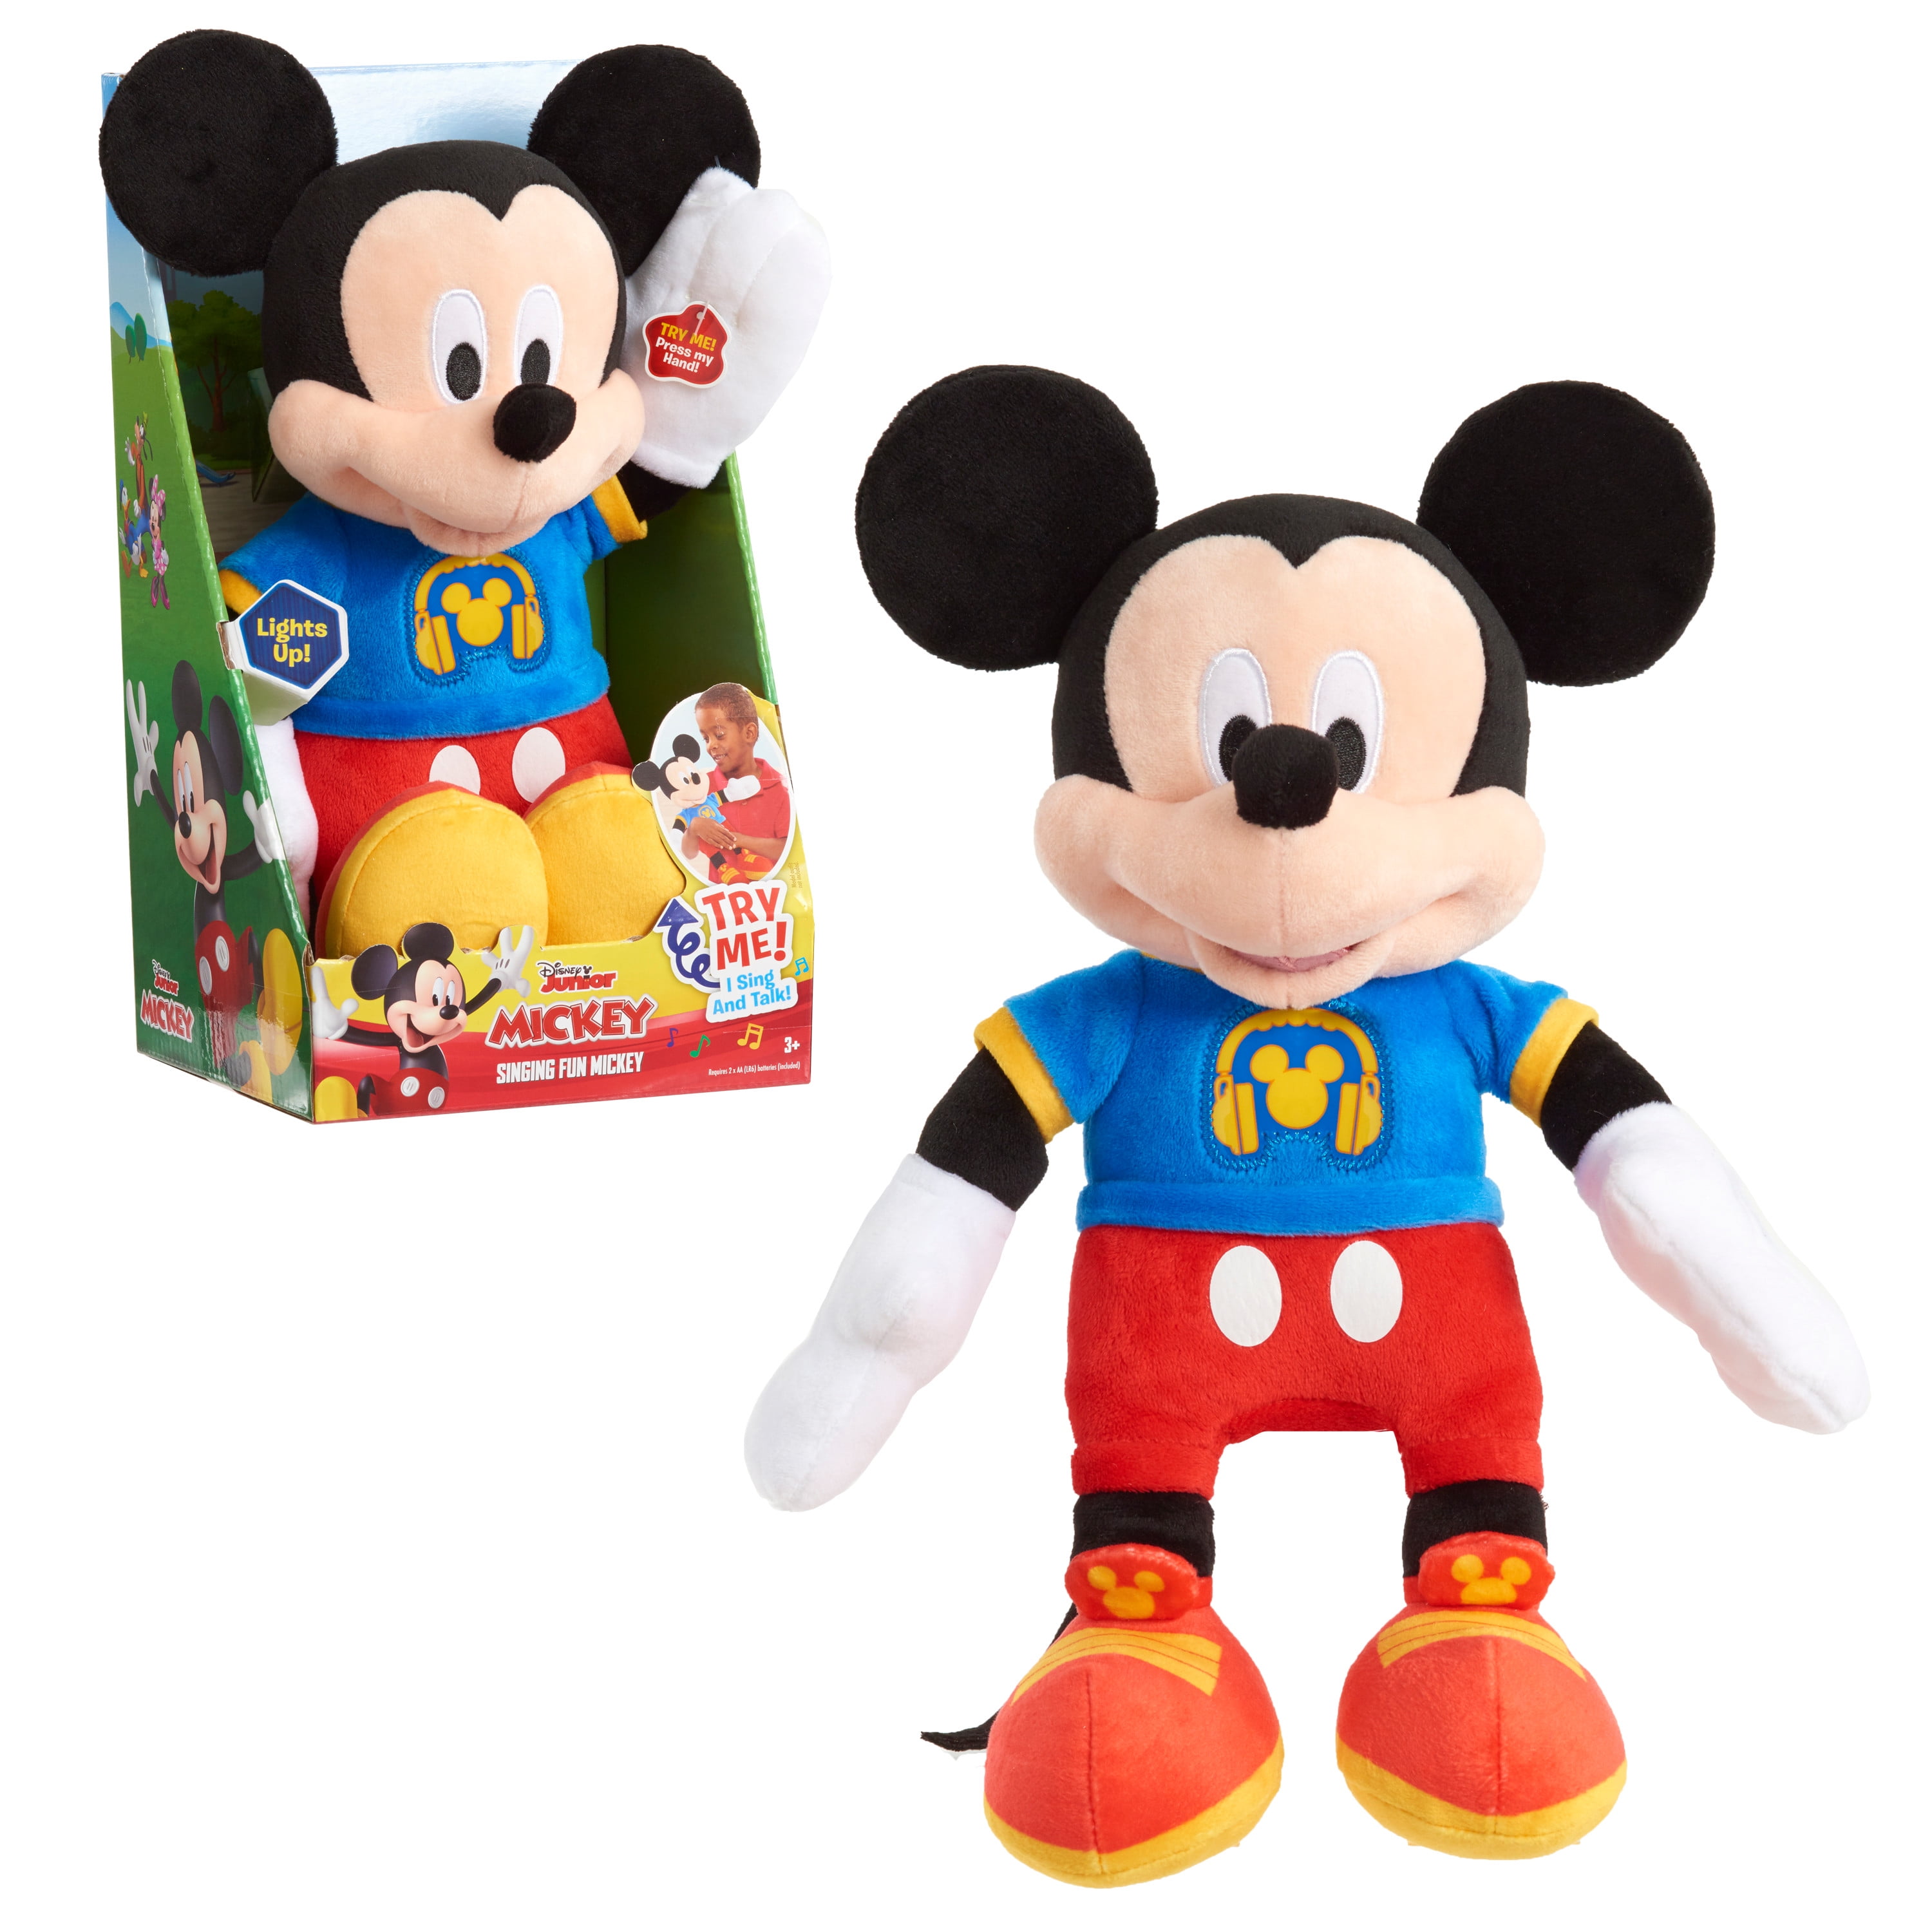 spreiding barrière Grace Disney Junior Mickey Mouse Singing Fun Mickey Mouse, 12-inch plush, Plush  Simple Feature, Ages 3 Up, by Just Play - Walmart.com